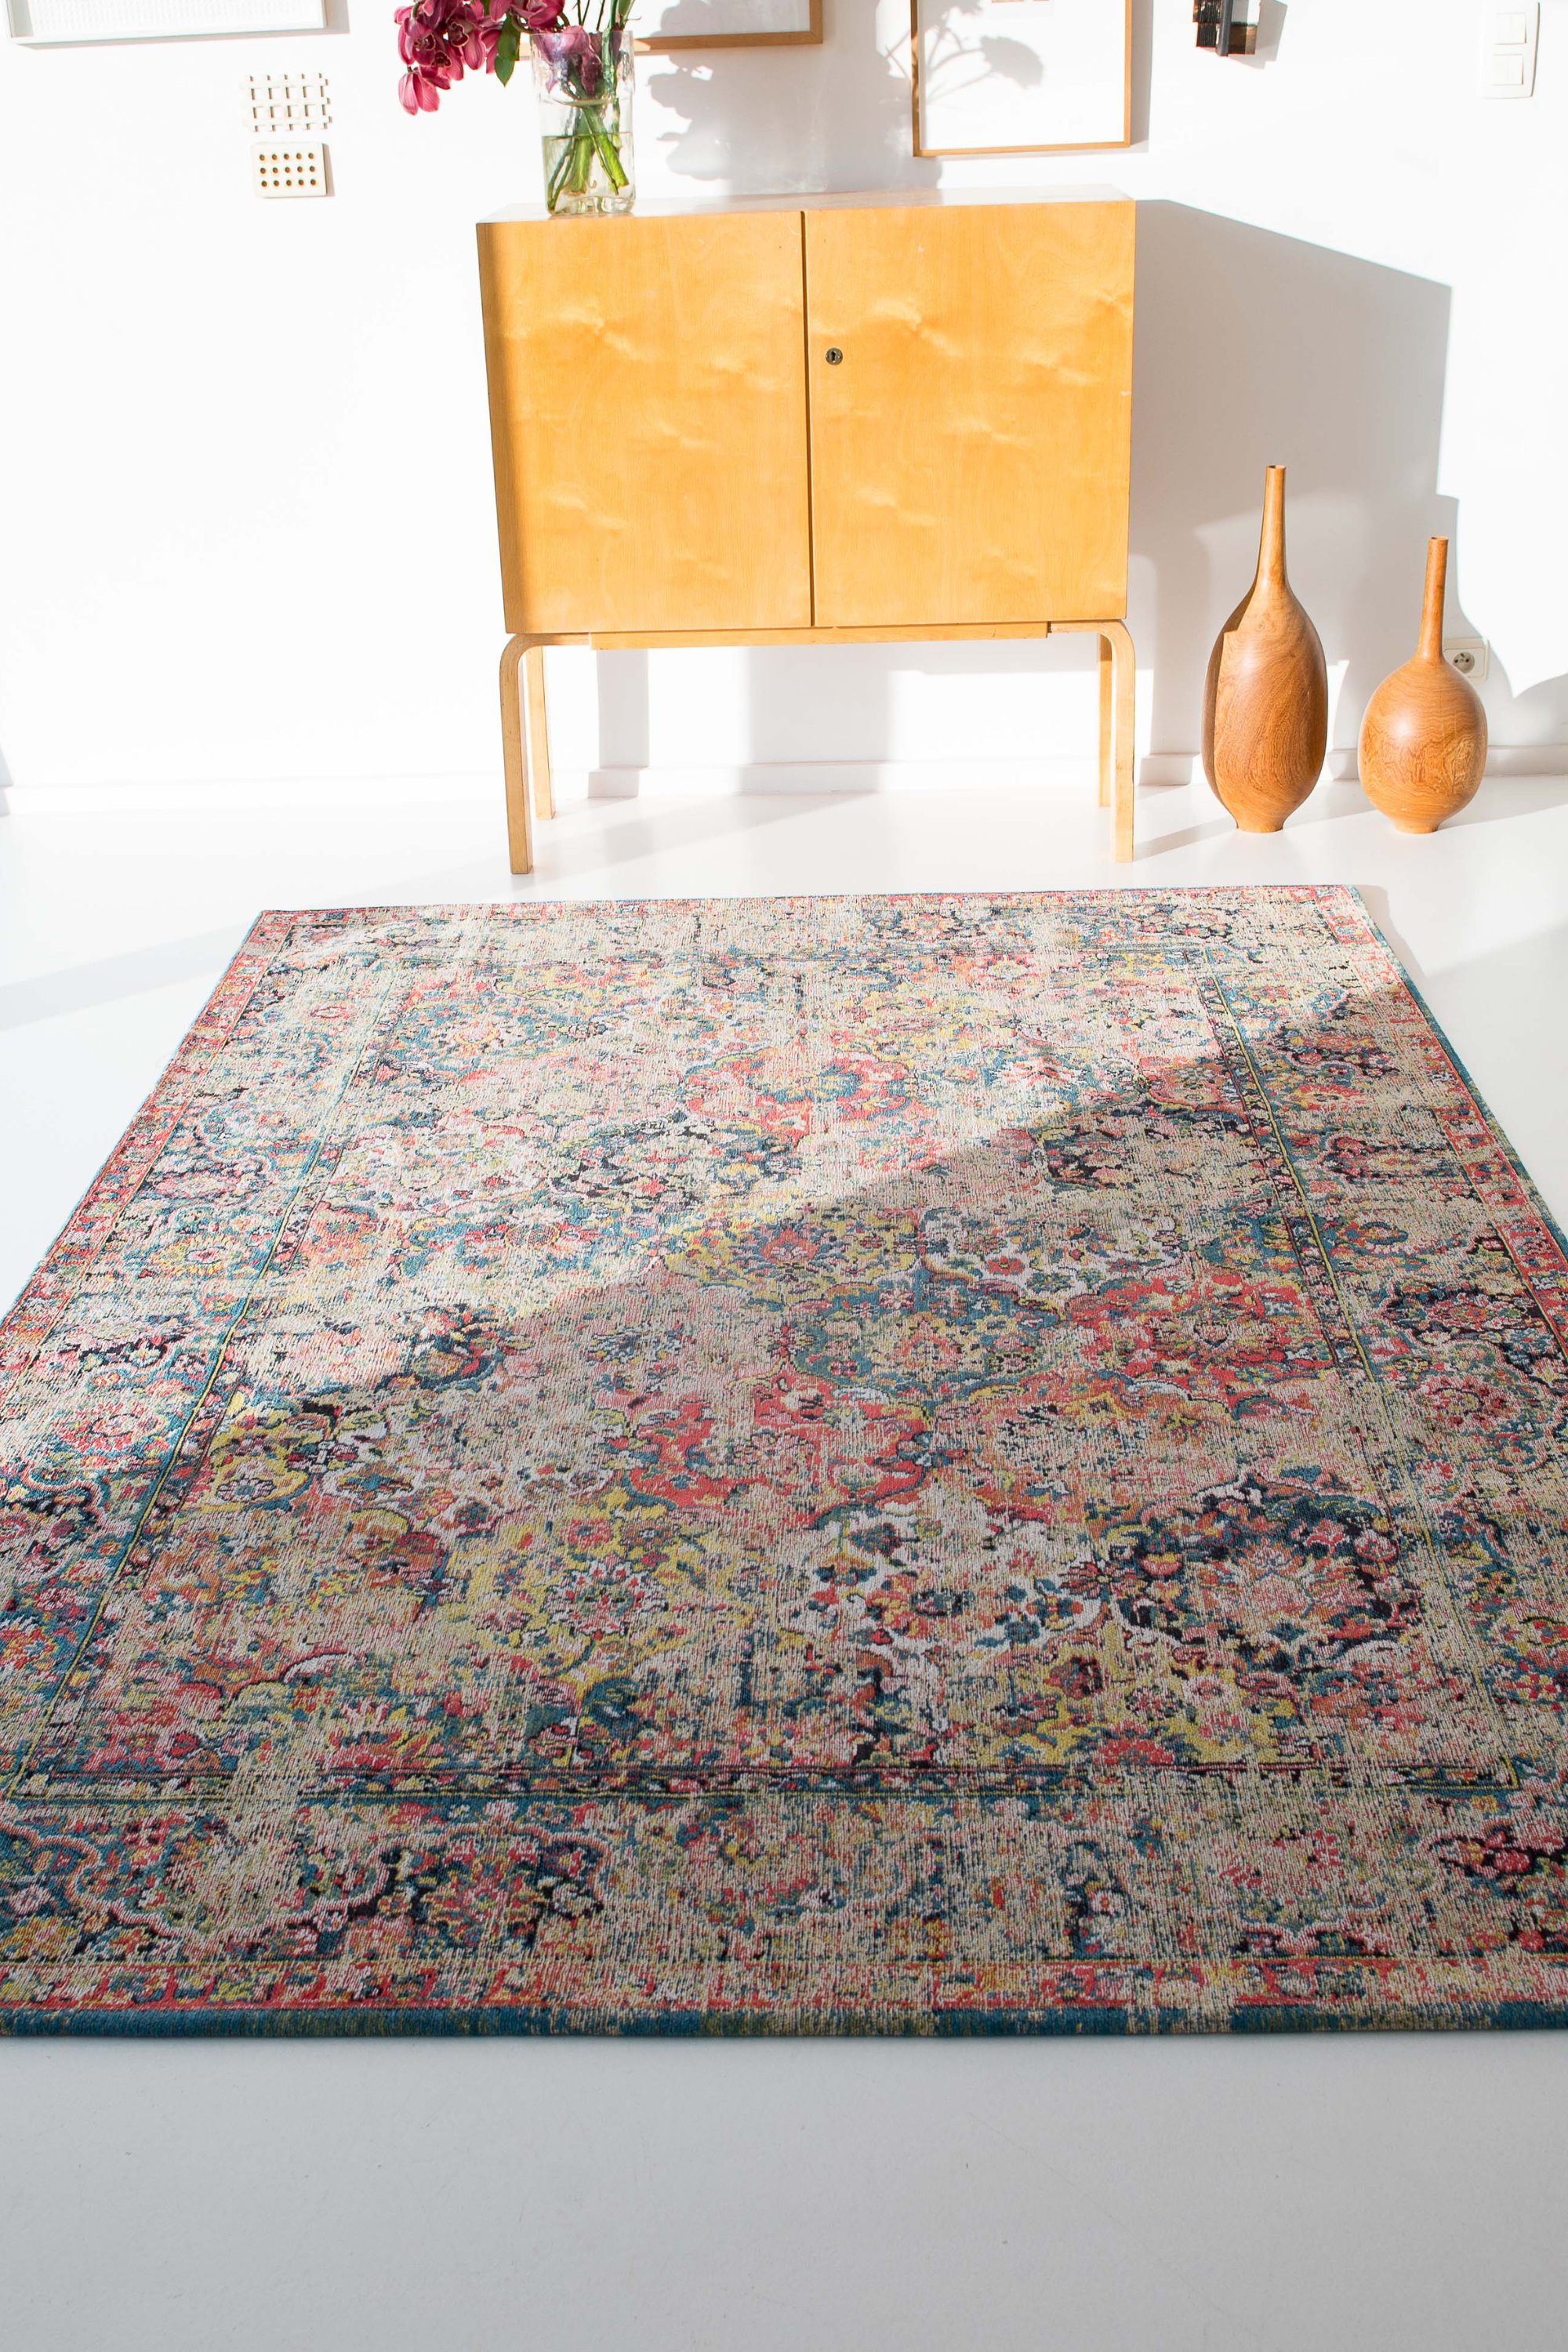 Flatweave rug with faded persian design in blue, red and yellow